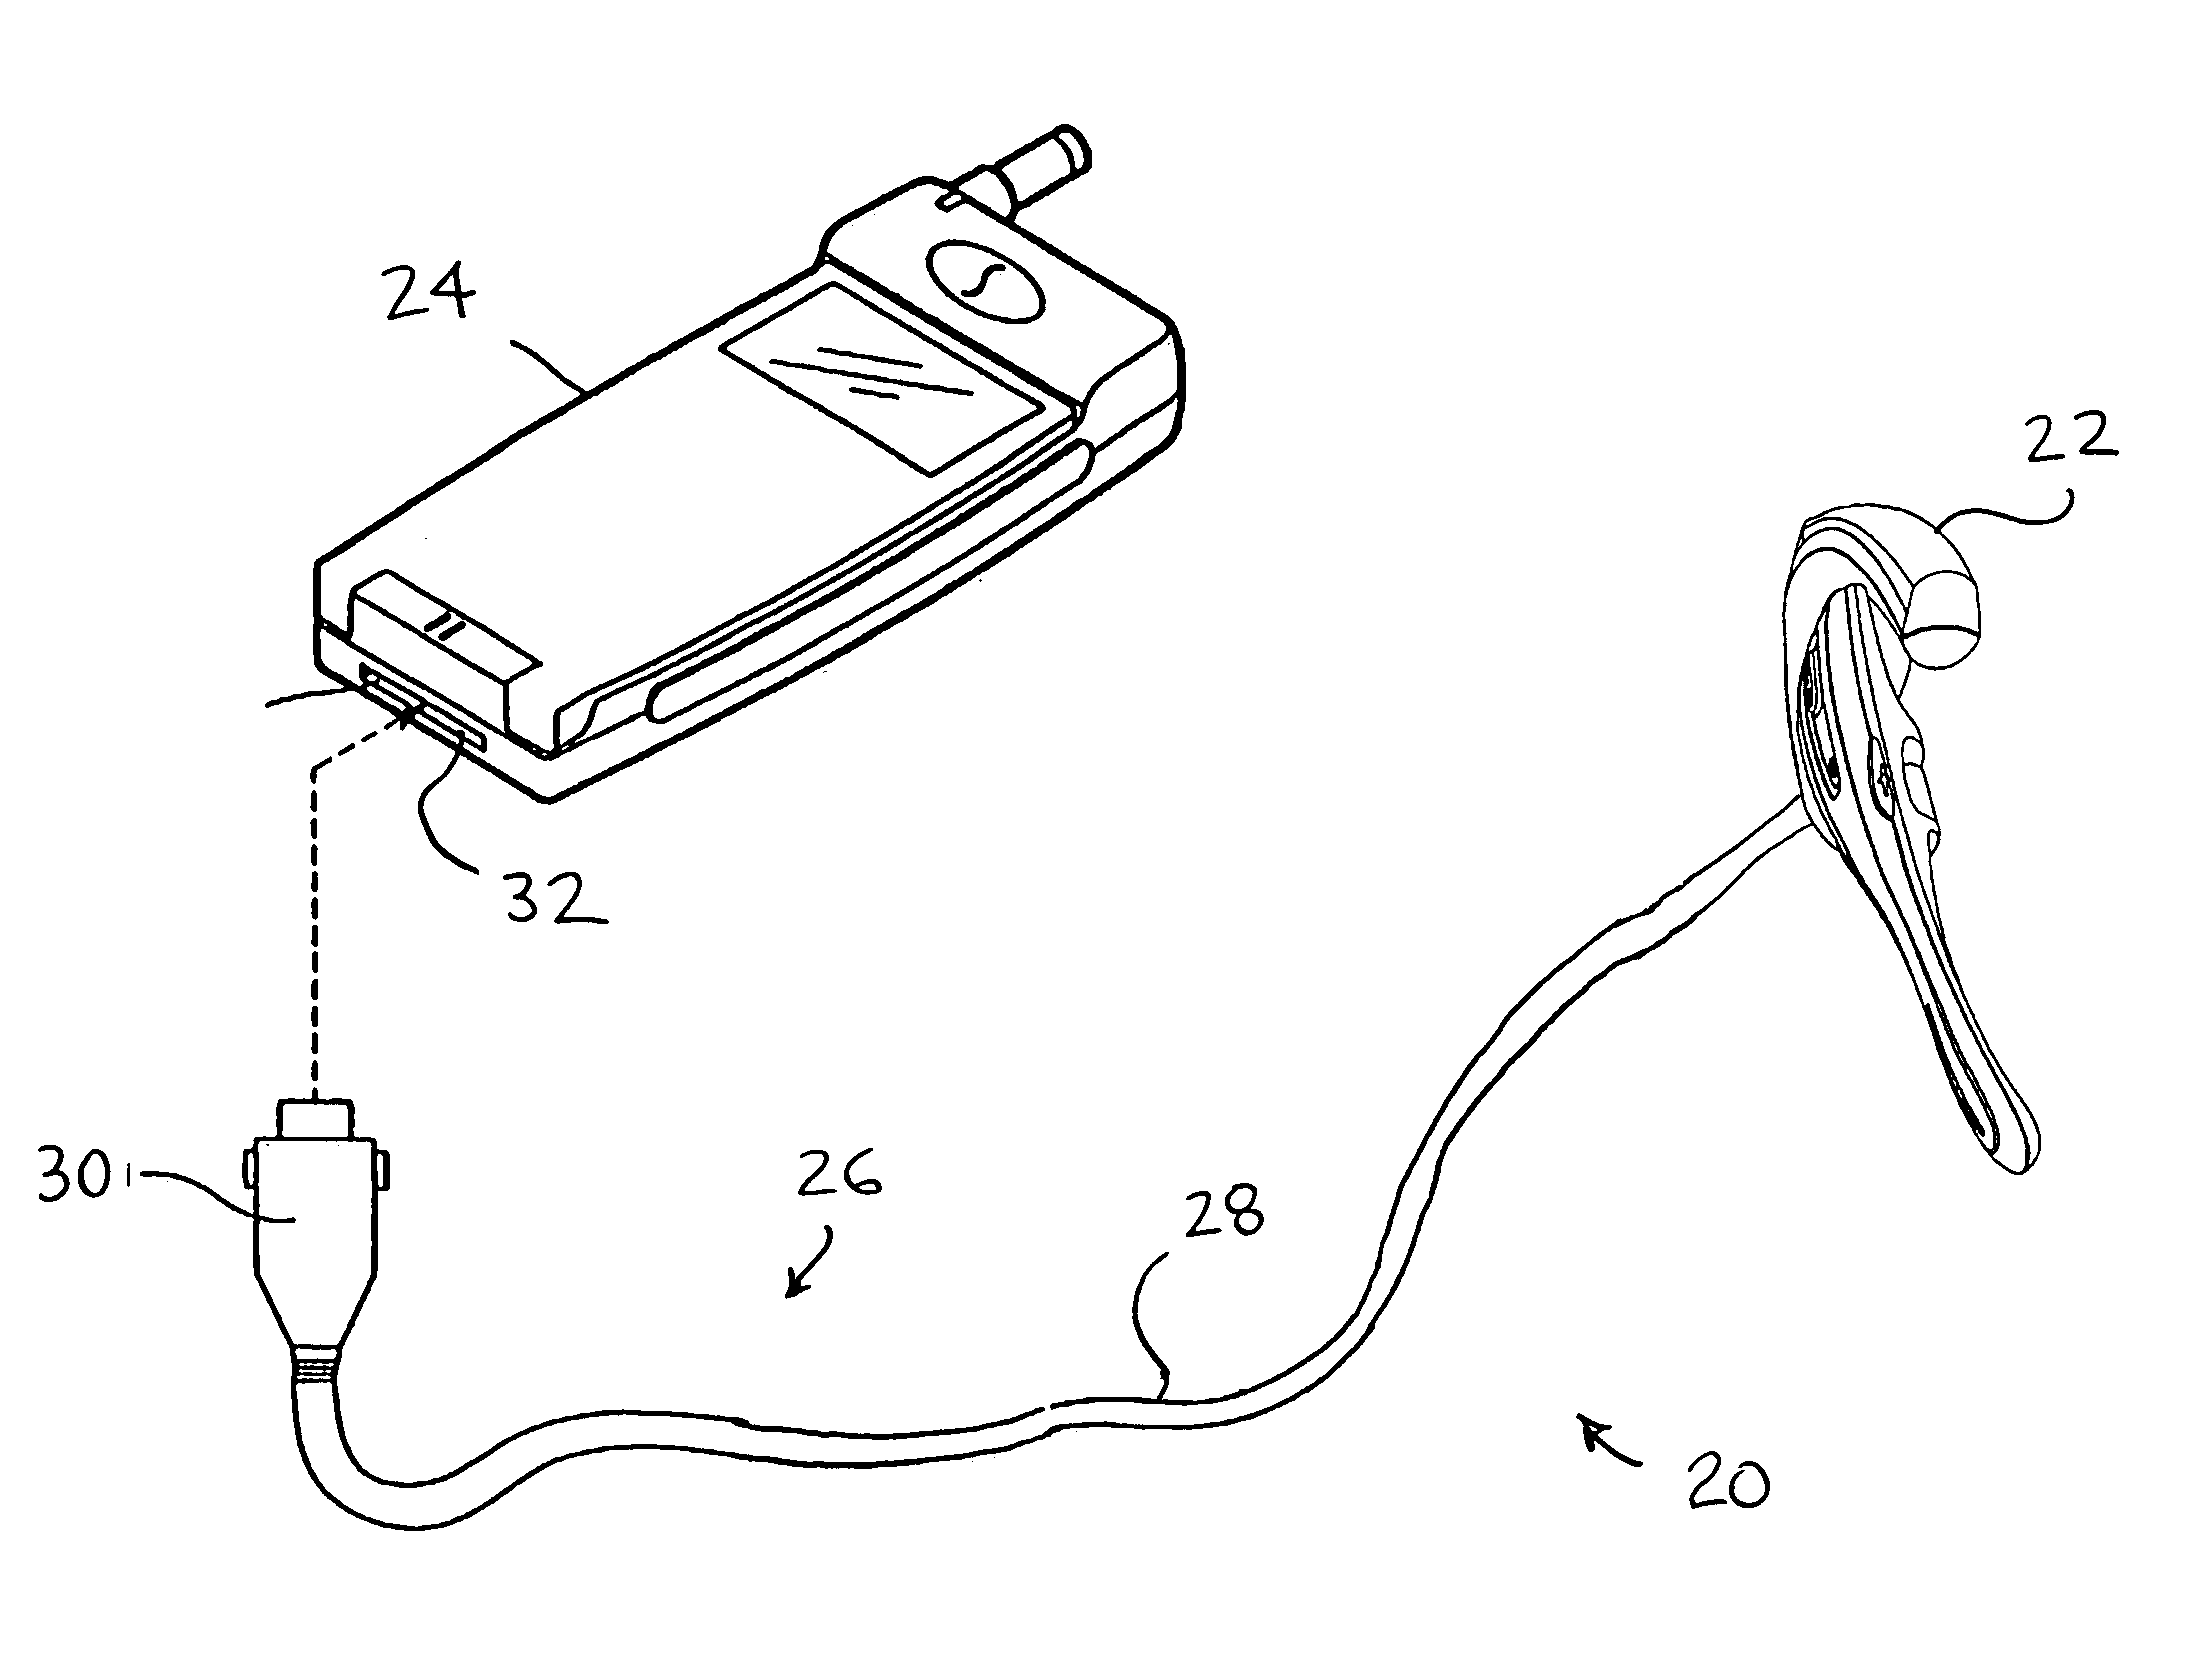 Cord control and accessories having cord control for use with portable electronic devices